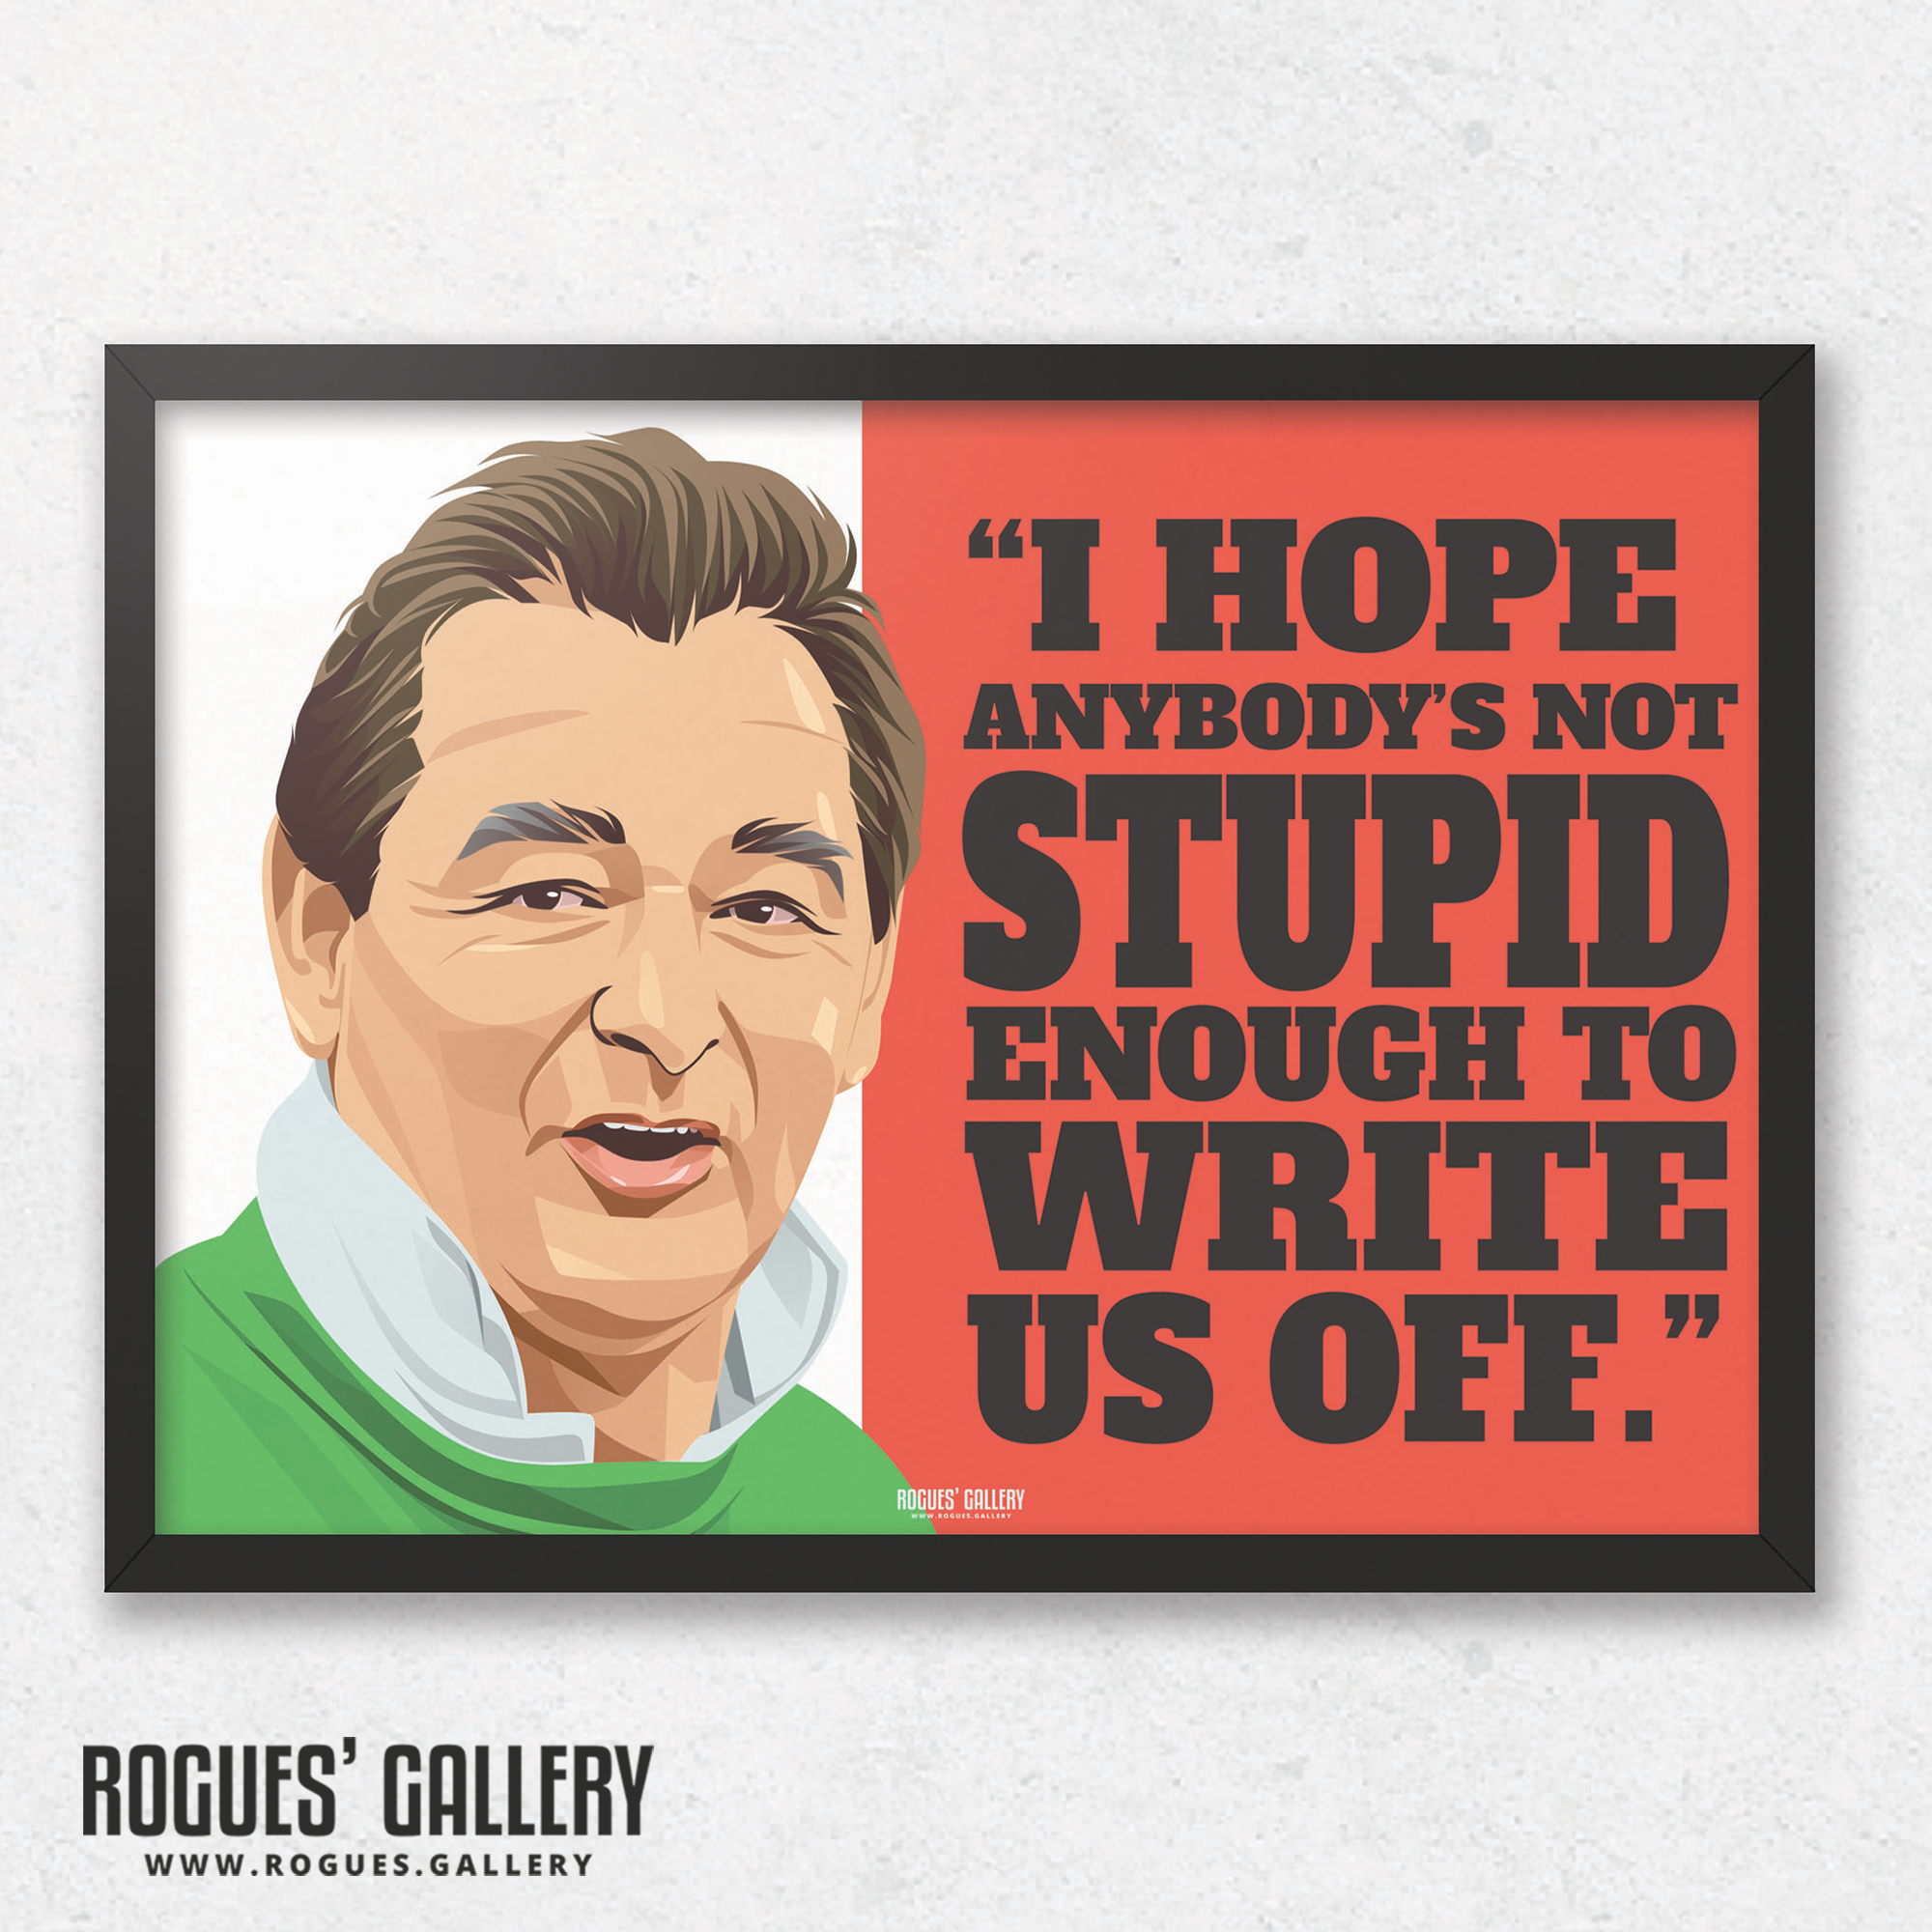 Brian Clough Nottingham Forest Stupid quote boss A3 print